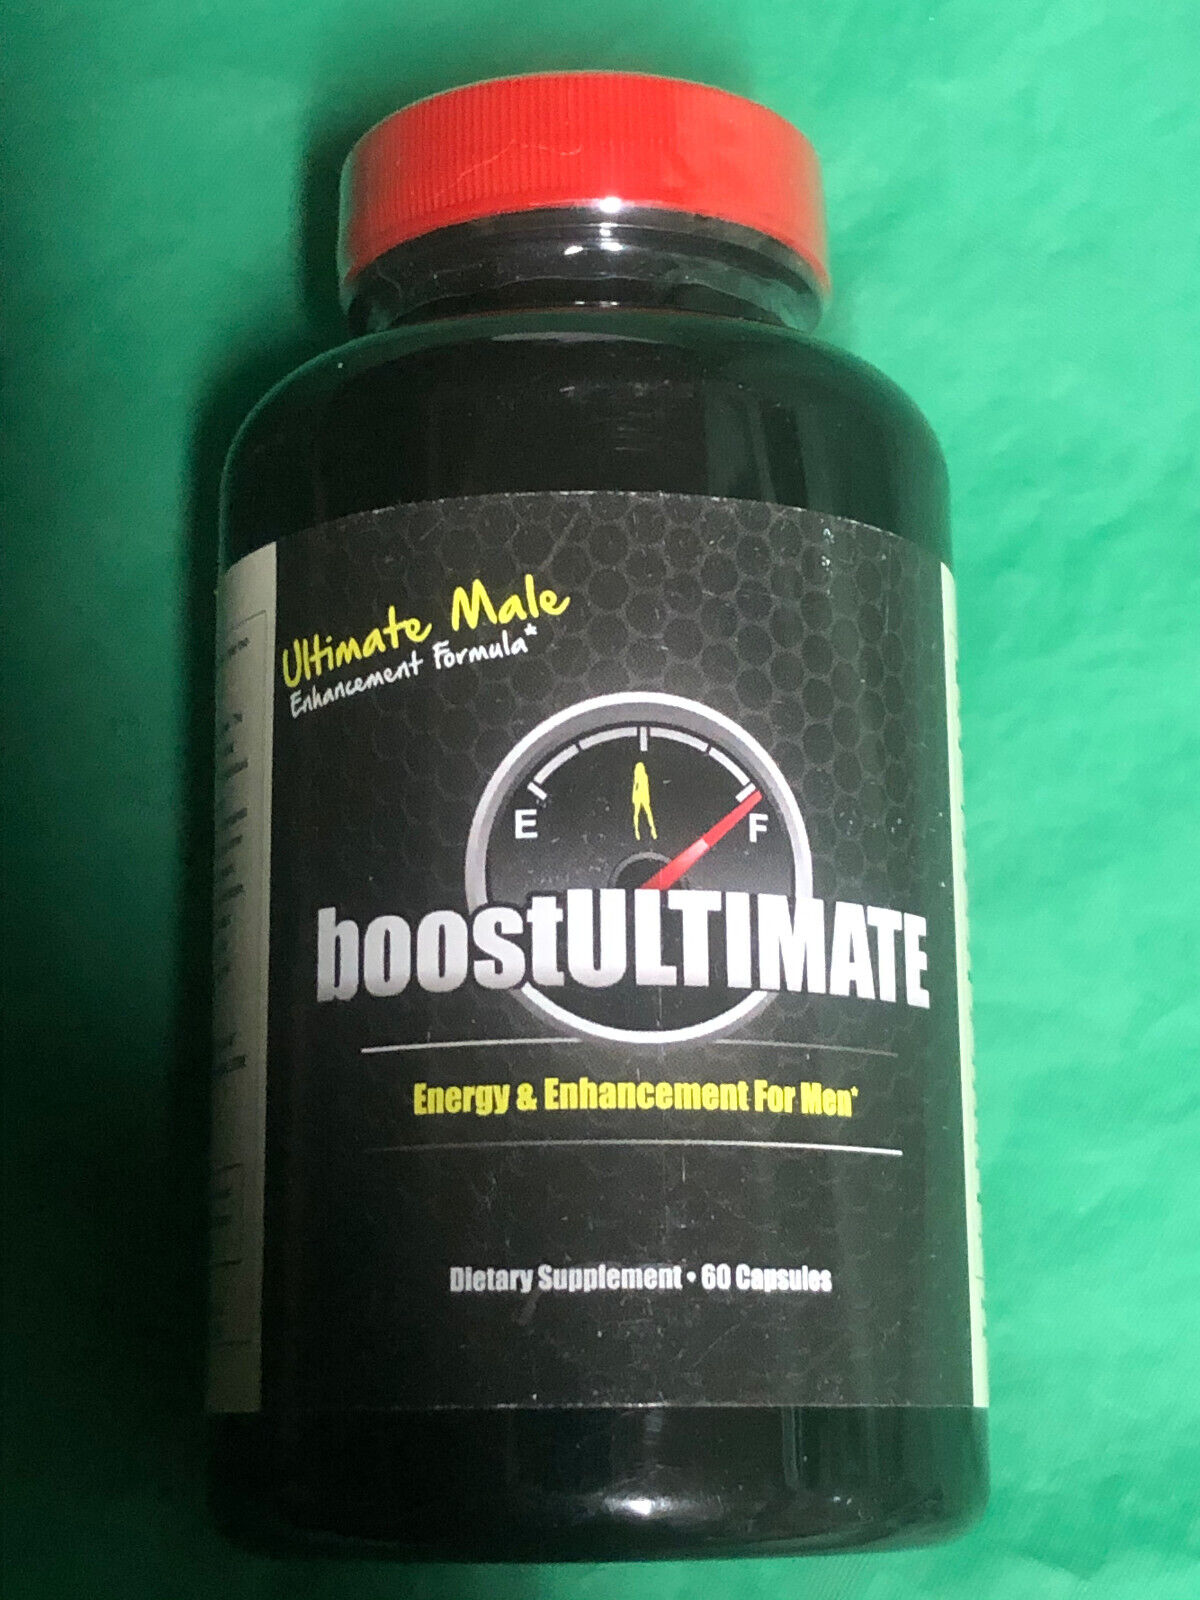 Men's Testosterone Pills For Vitality & Sexual Drive By Boost-Ultimate - 60 Caps